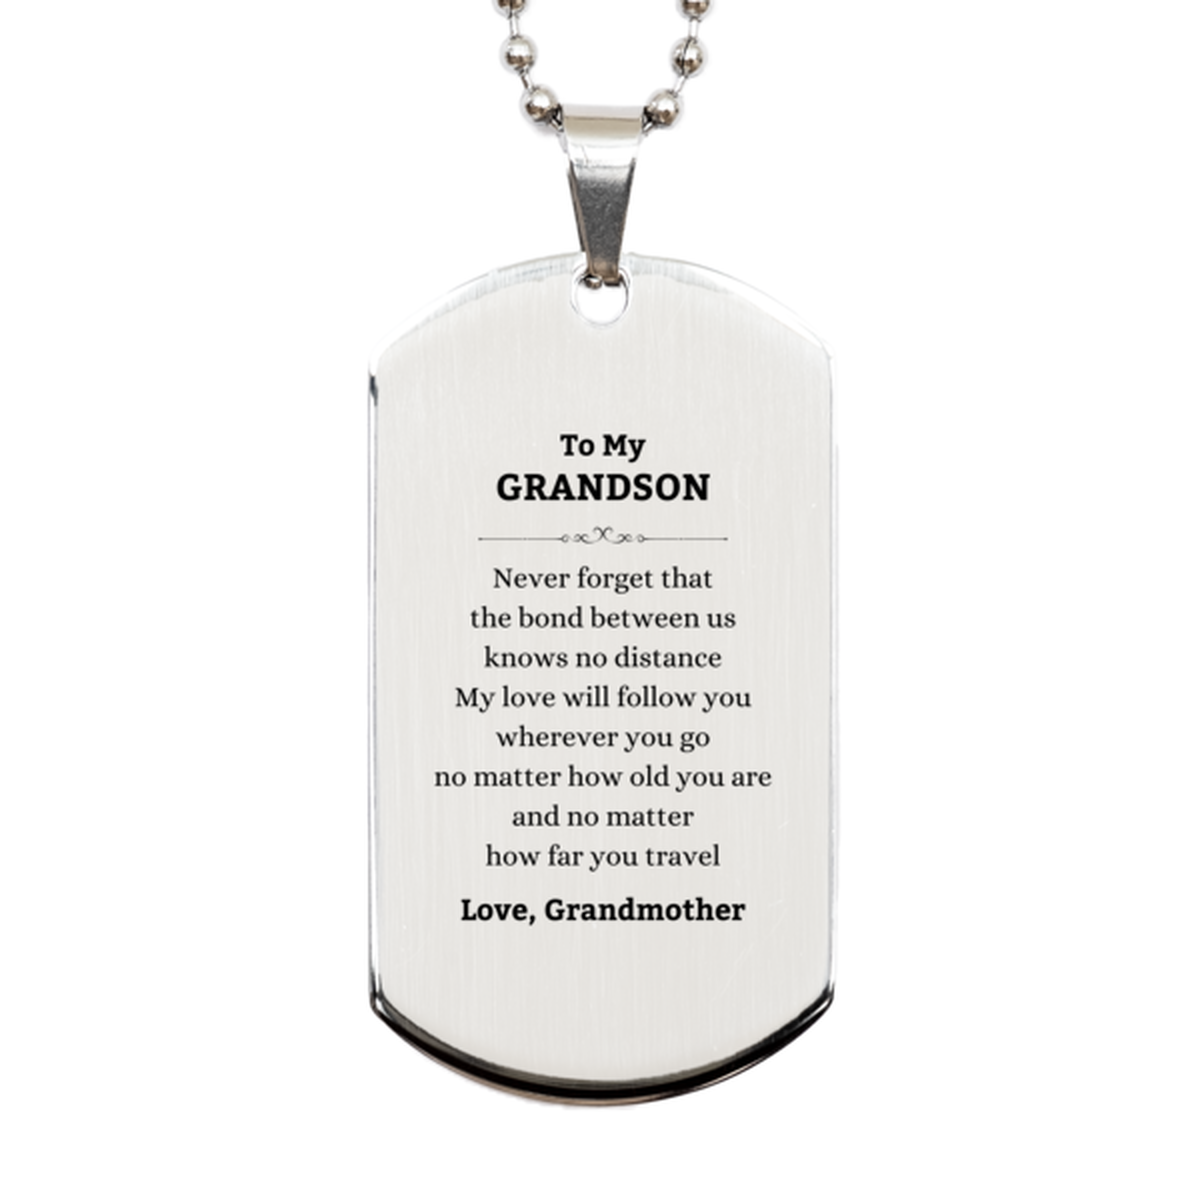 Grandson Birthday Gifts from Grandmother, Adjustable Silver Dog Tag for Grandson Christmas Graduation Unique Gifts Grandson Never forget that the bond between us knows no distance. Love, Grandmother